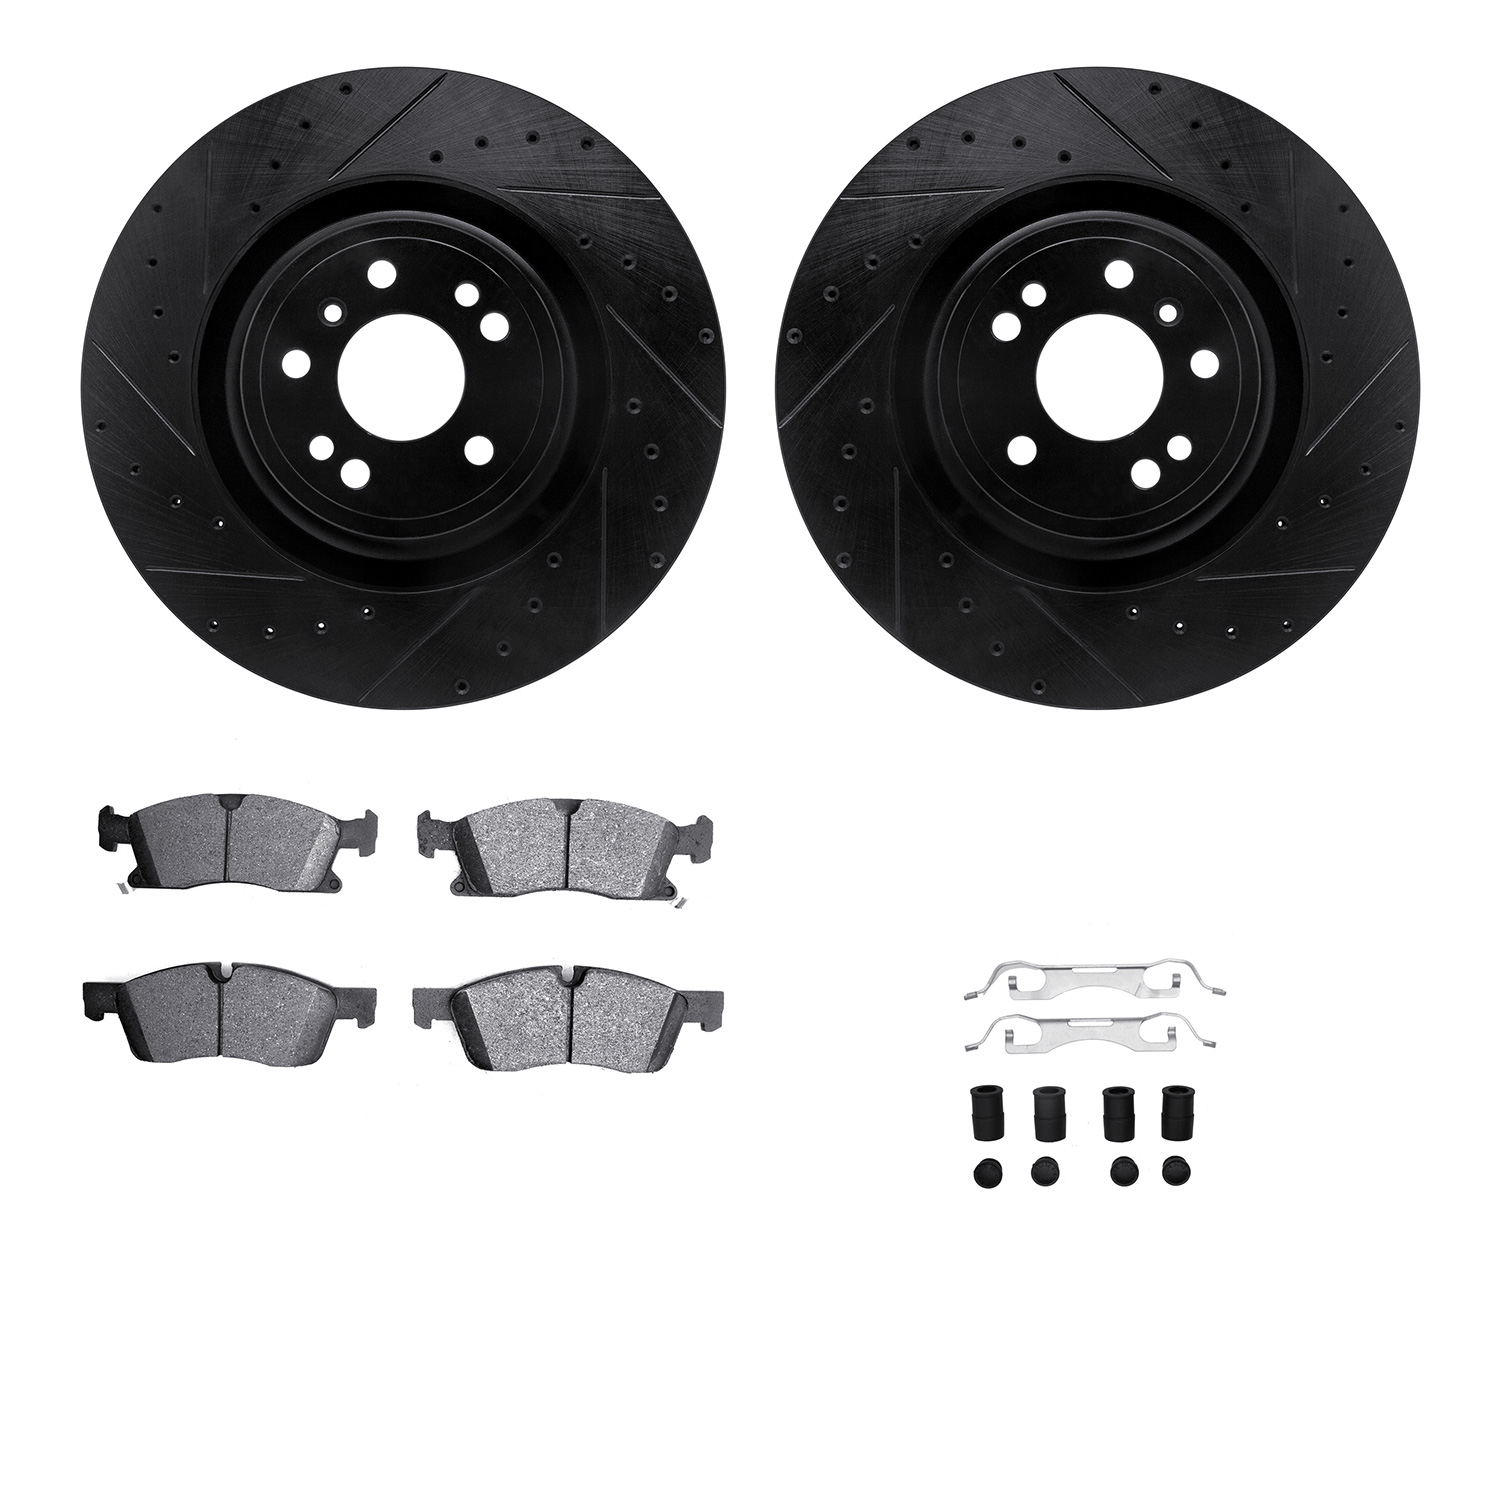 8412-63003 Drilled/Slotted Brake Rotors with Ultimate-Duty Brake Pads Kit & Hardware [Black], 2013-2019 Mercedes-Benz, Position: